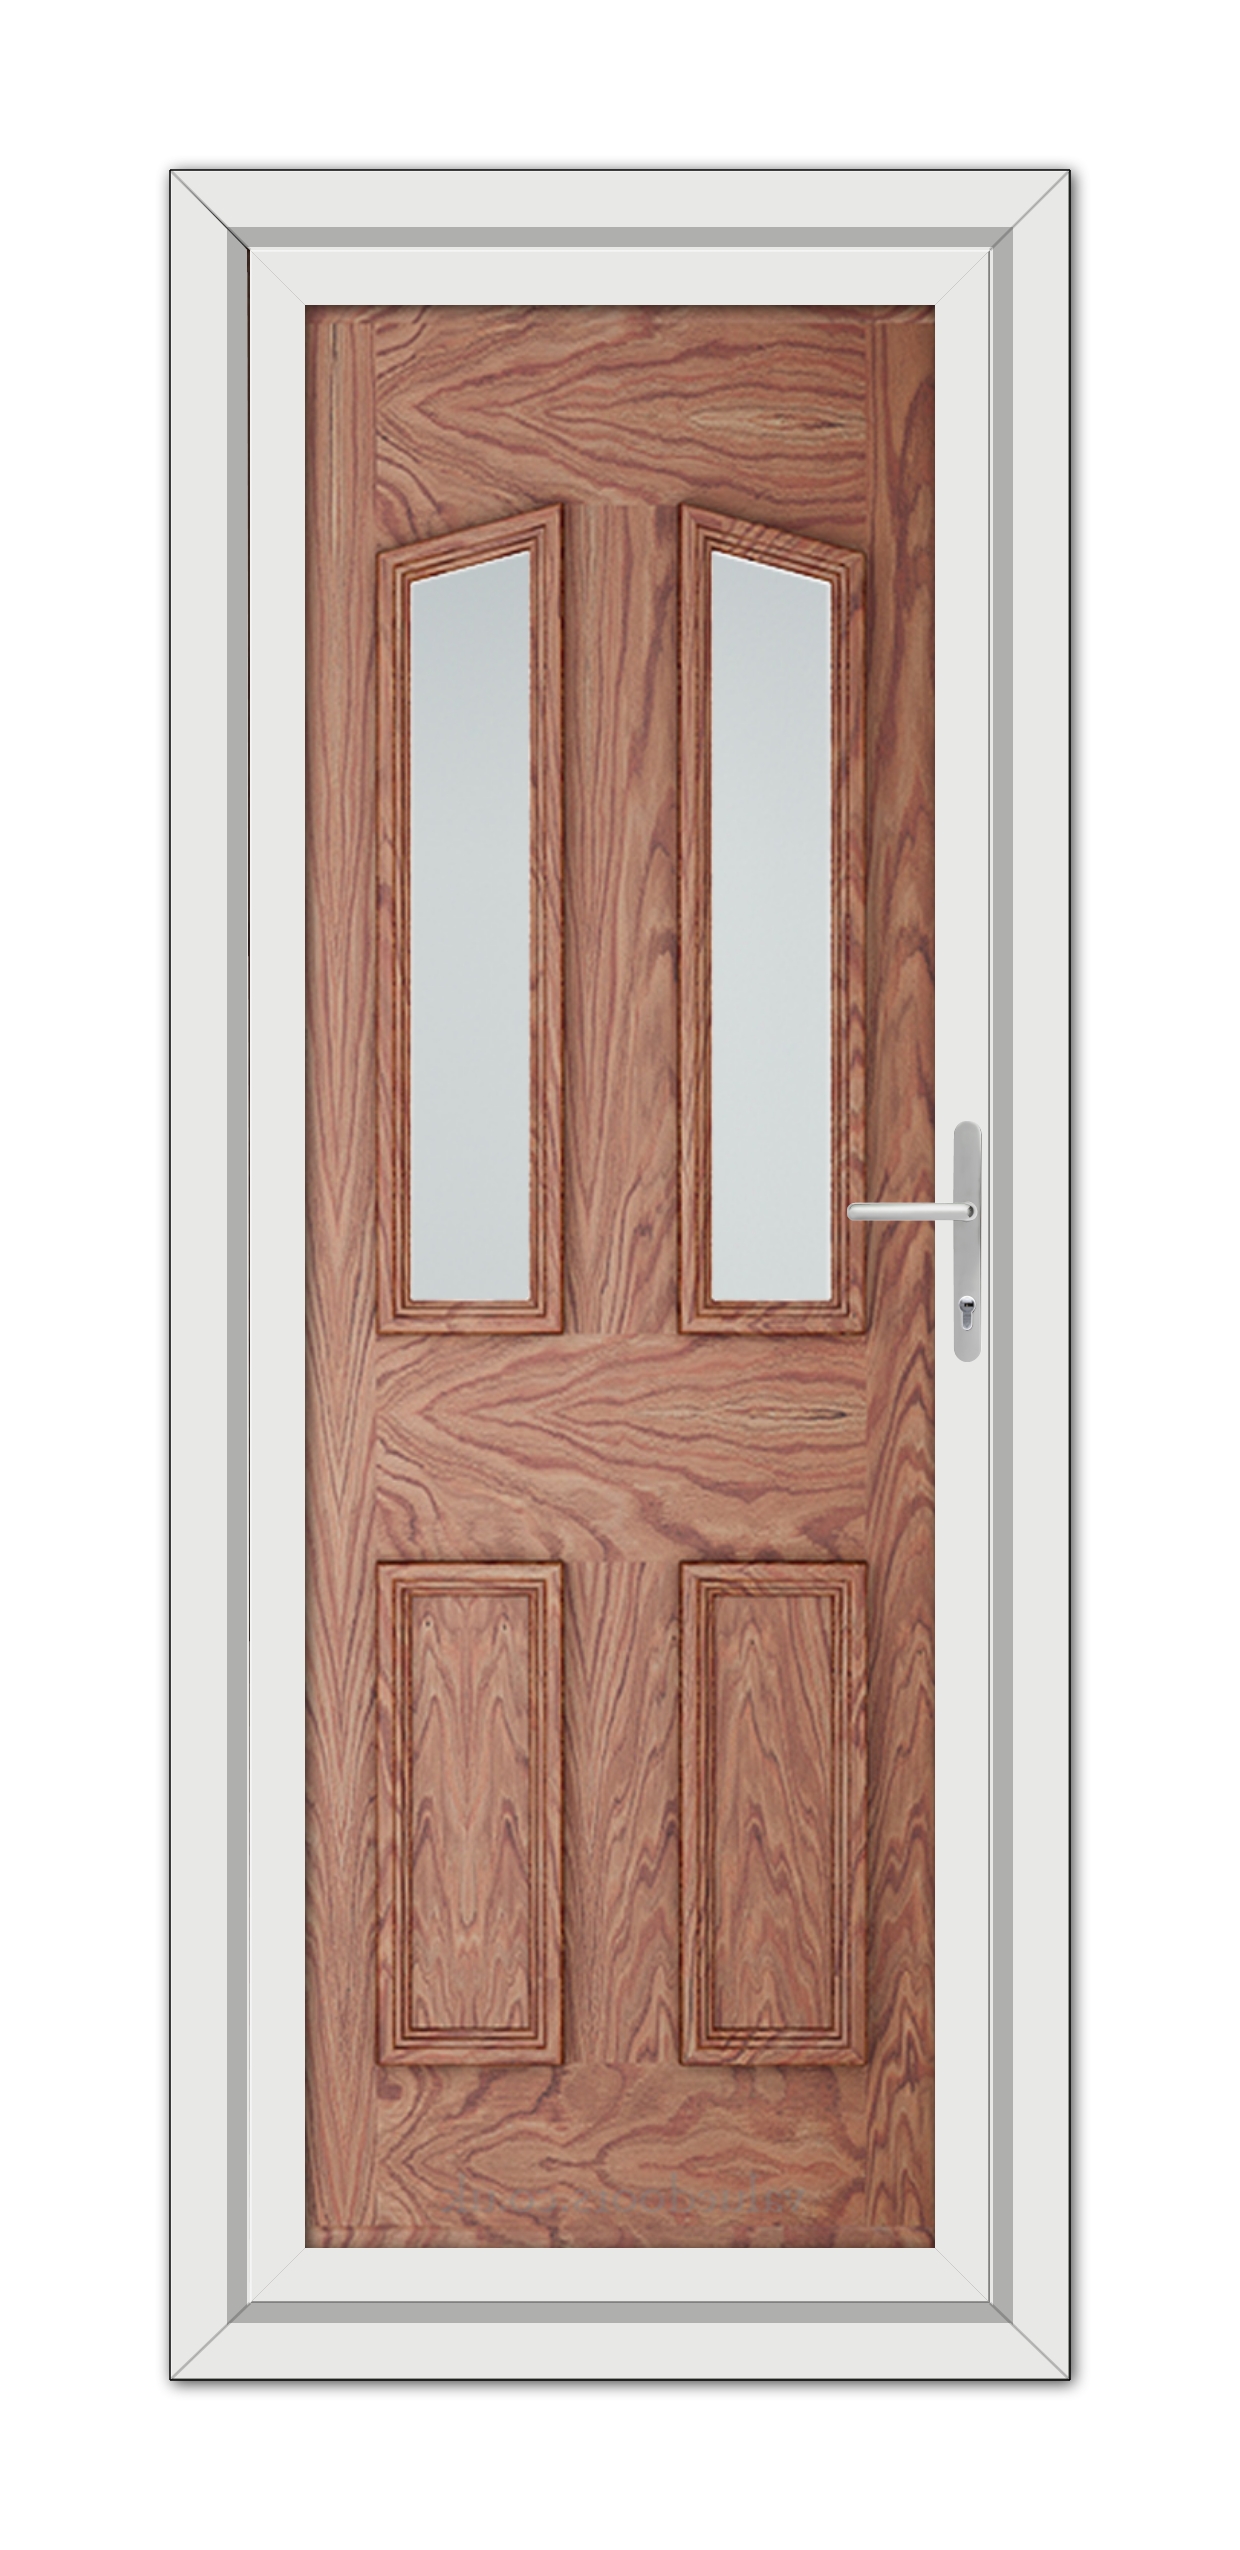 A Solid Oak Kensington uPVC front door with two vertical glass panels, framed in white, featuring a modern handle on the right side.